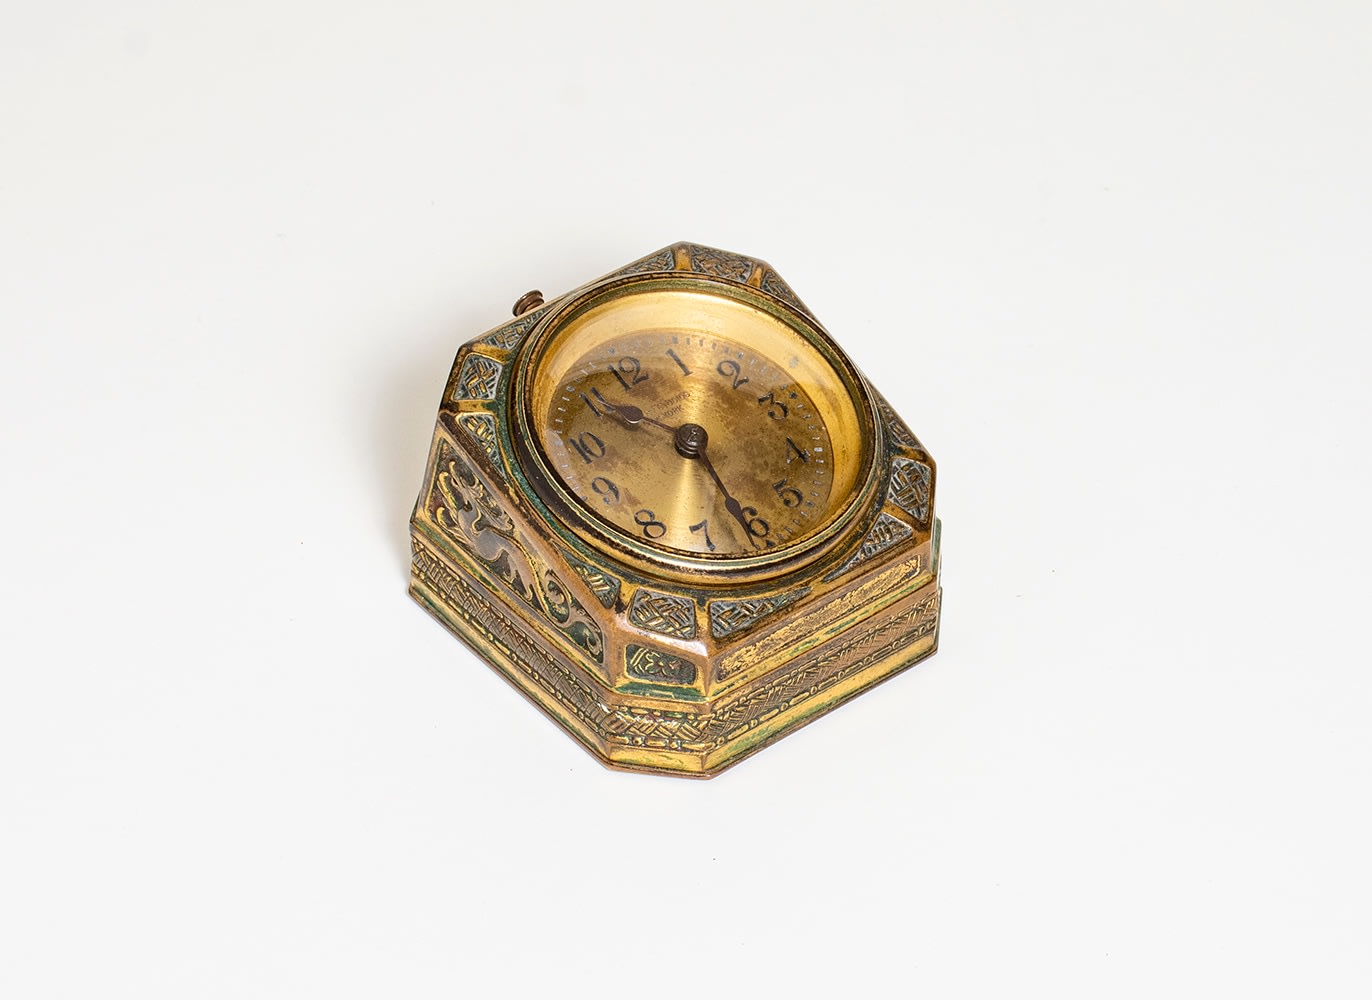 a gilt bronze desk clock by tiffany studios from the spanish desk set, with elaborate surface decoration